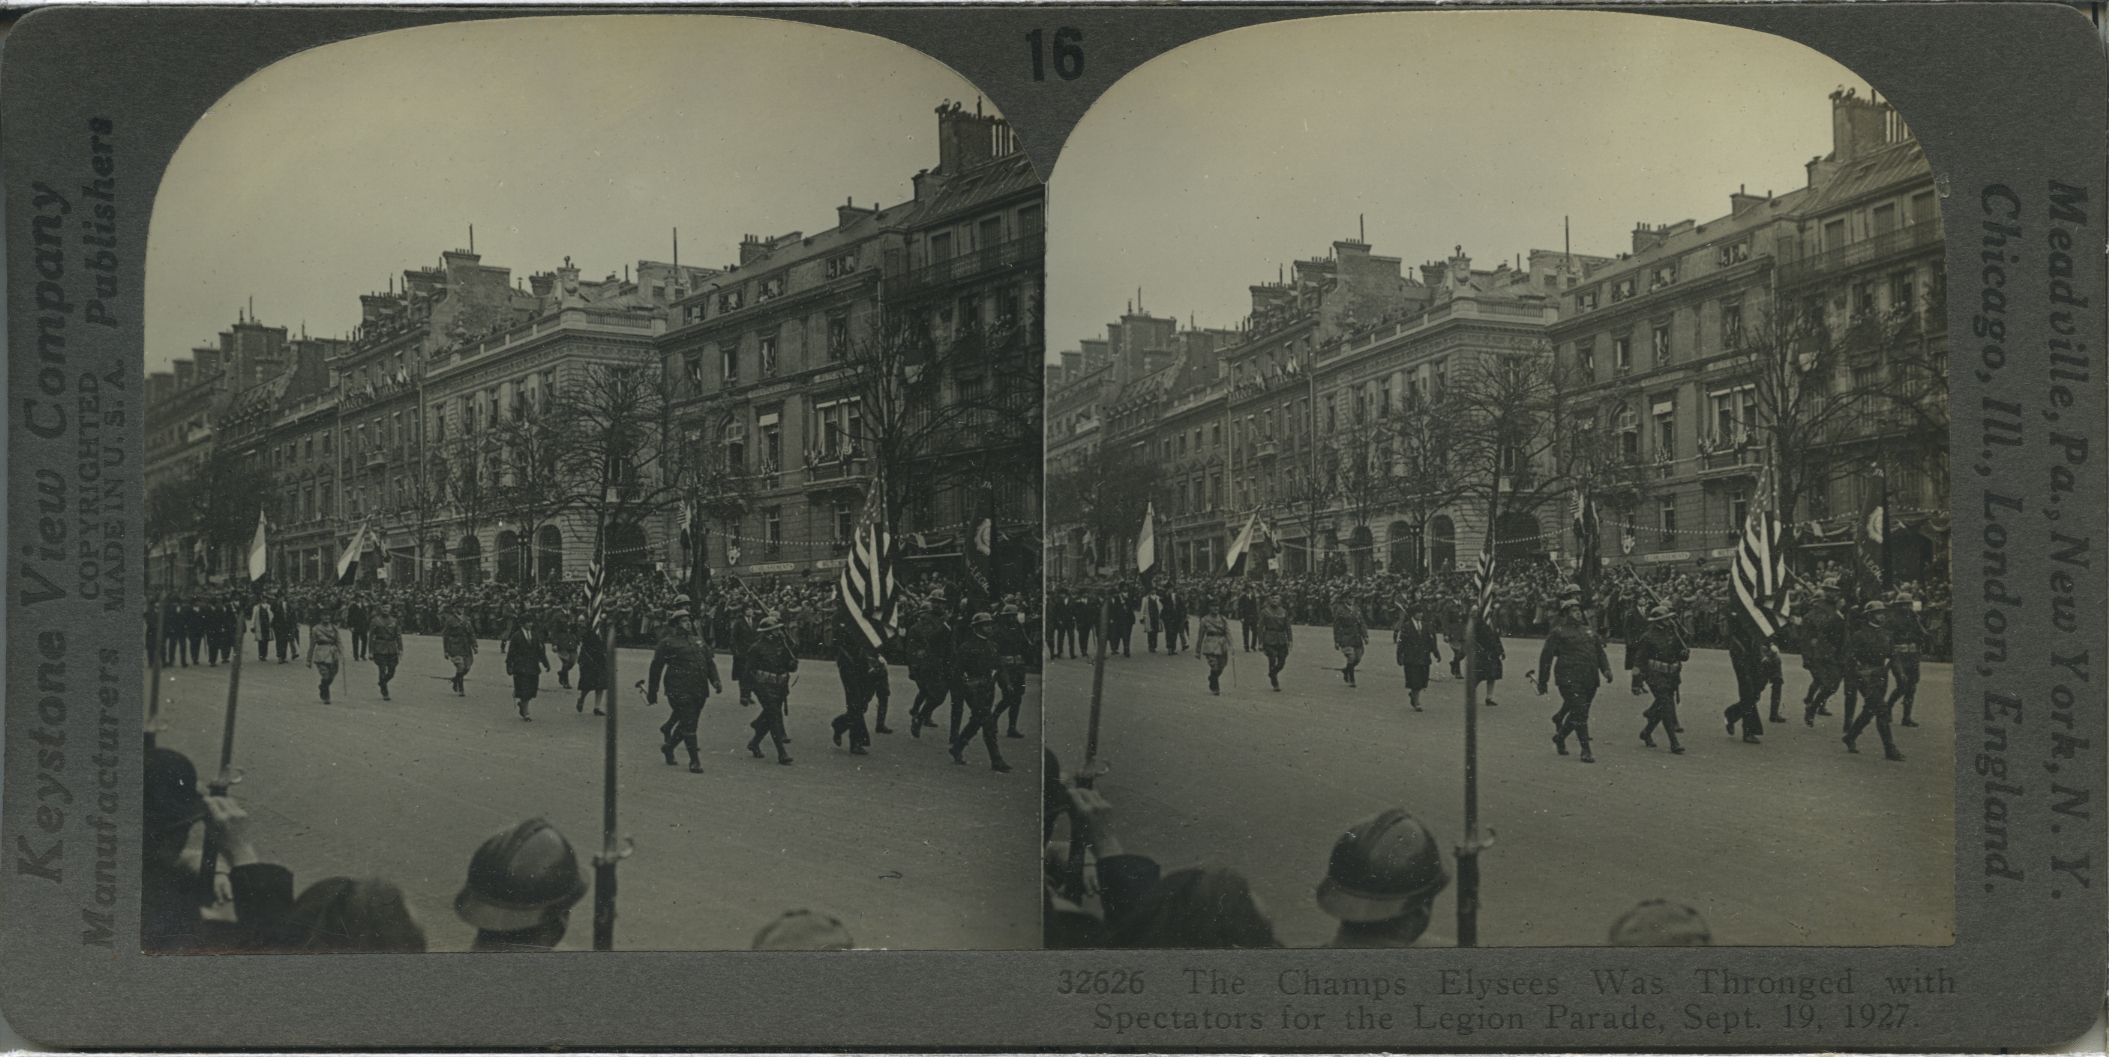 The Champs Elysees was Thronged with Spectators for the Legion Parade, Sept. 19, 1927.